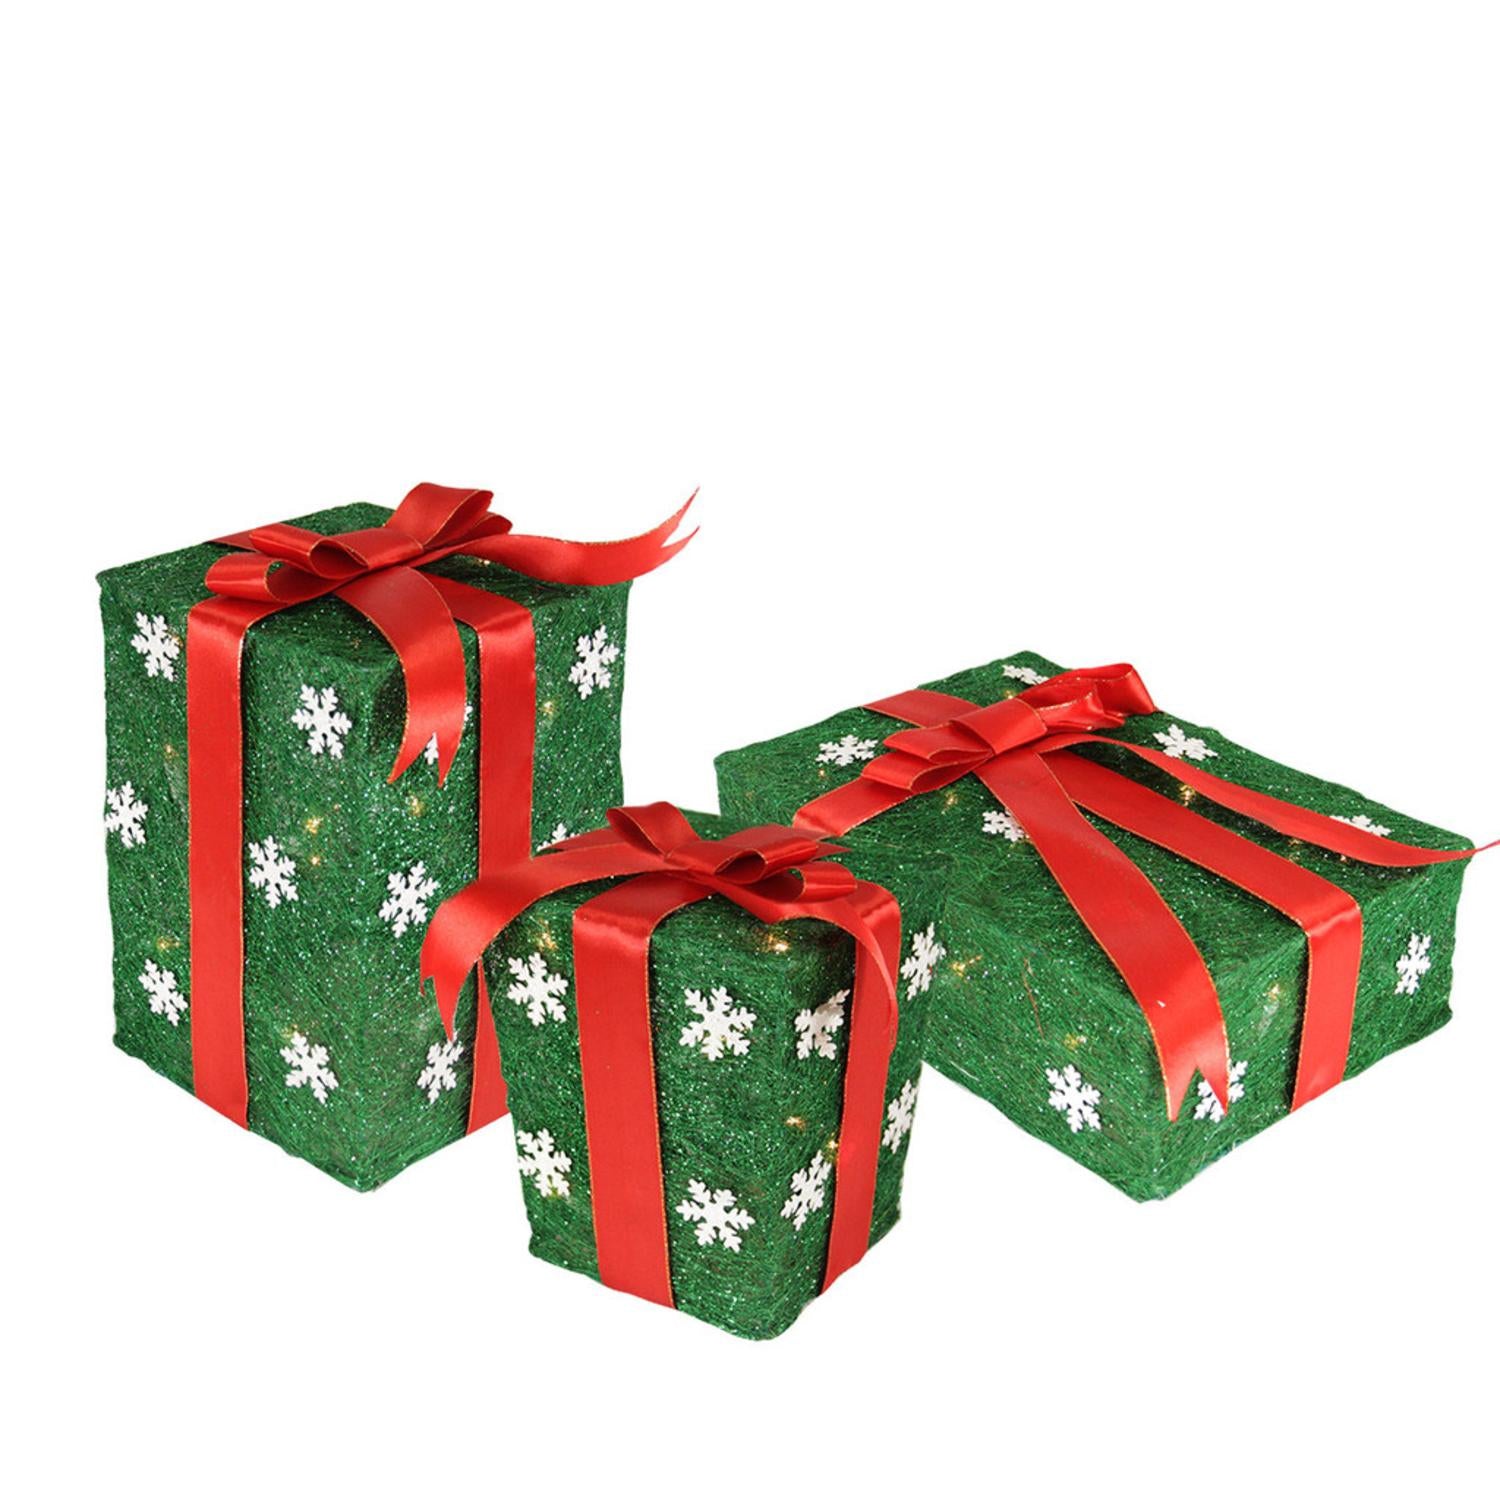 Set of 3 Green Snowflake Sisal Gift Boxes Lighted Christmas Outdoor Decorations